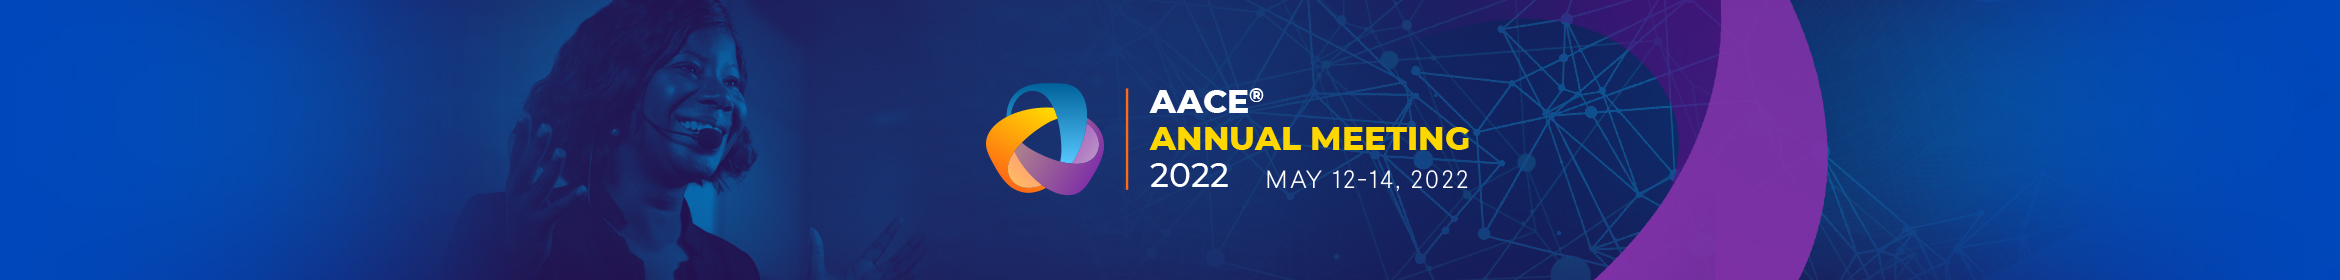 AACE 2022 Annual Meeting Main banner